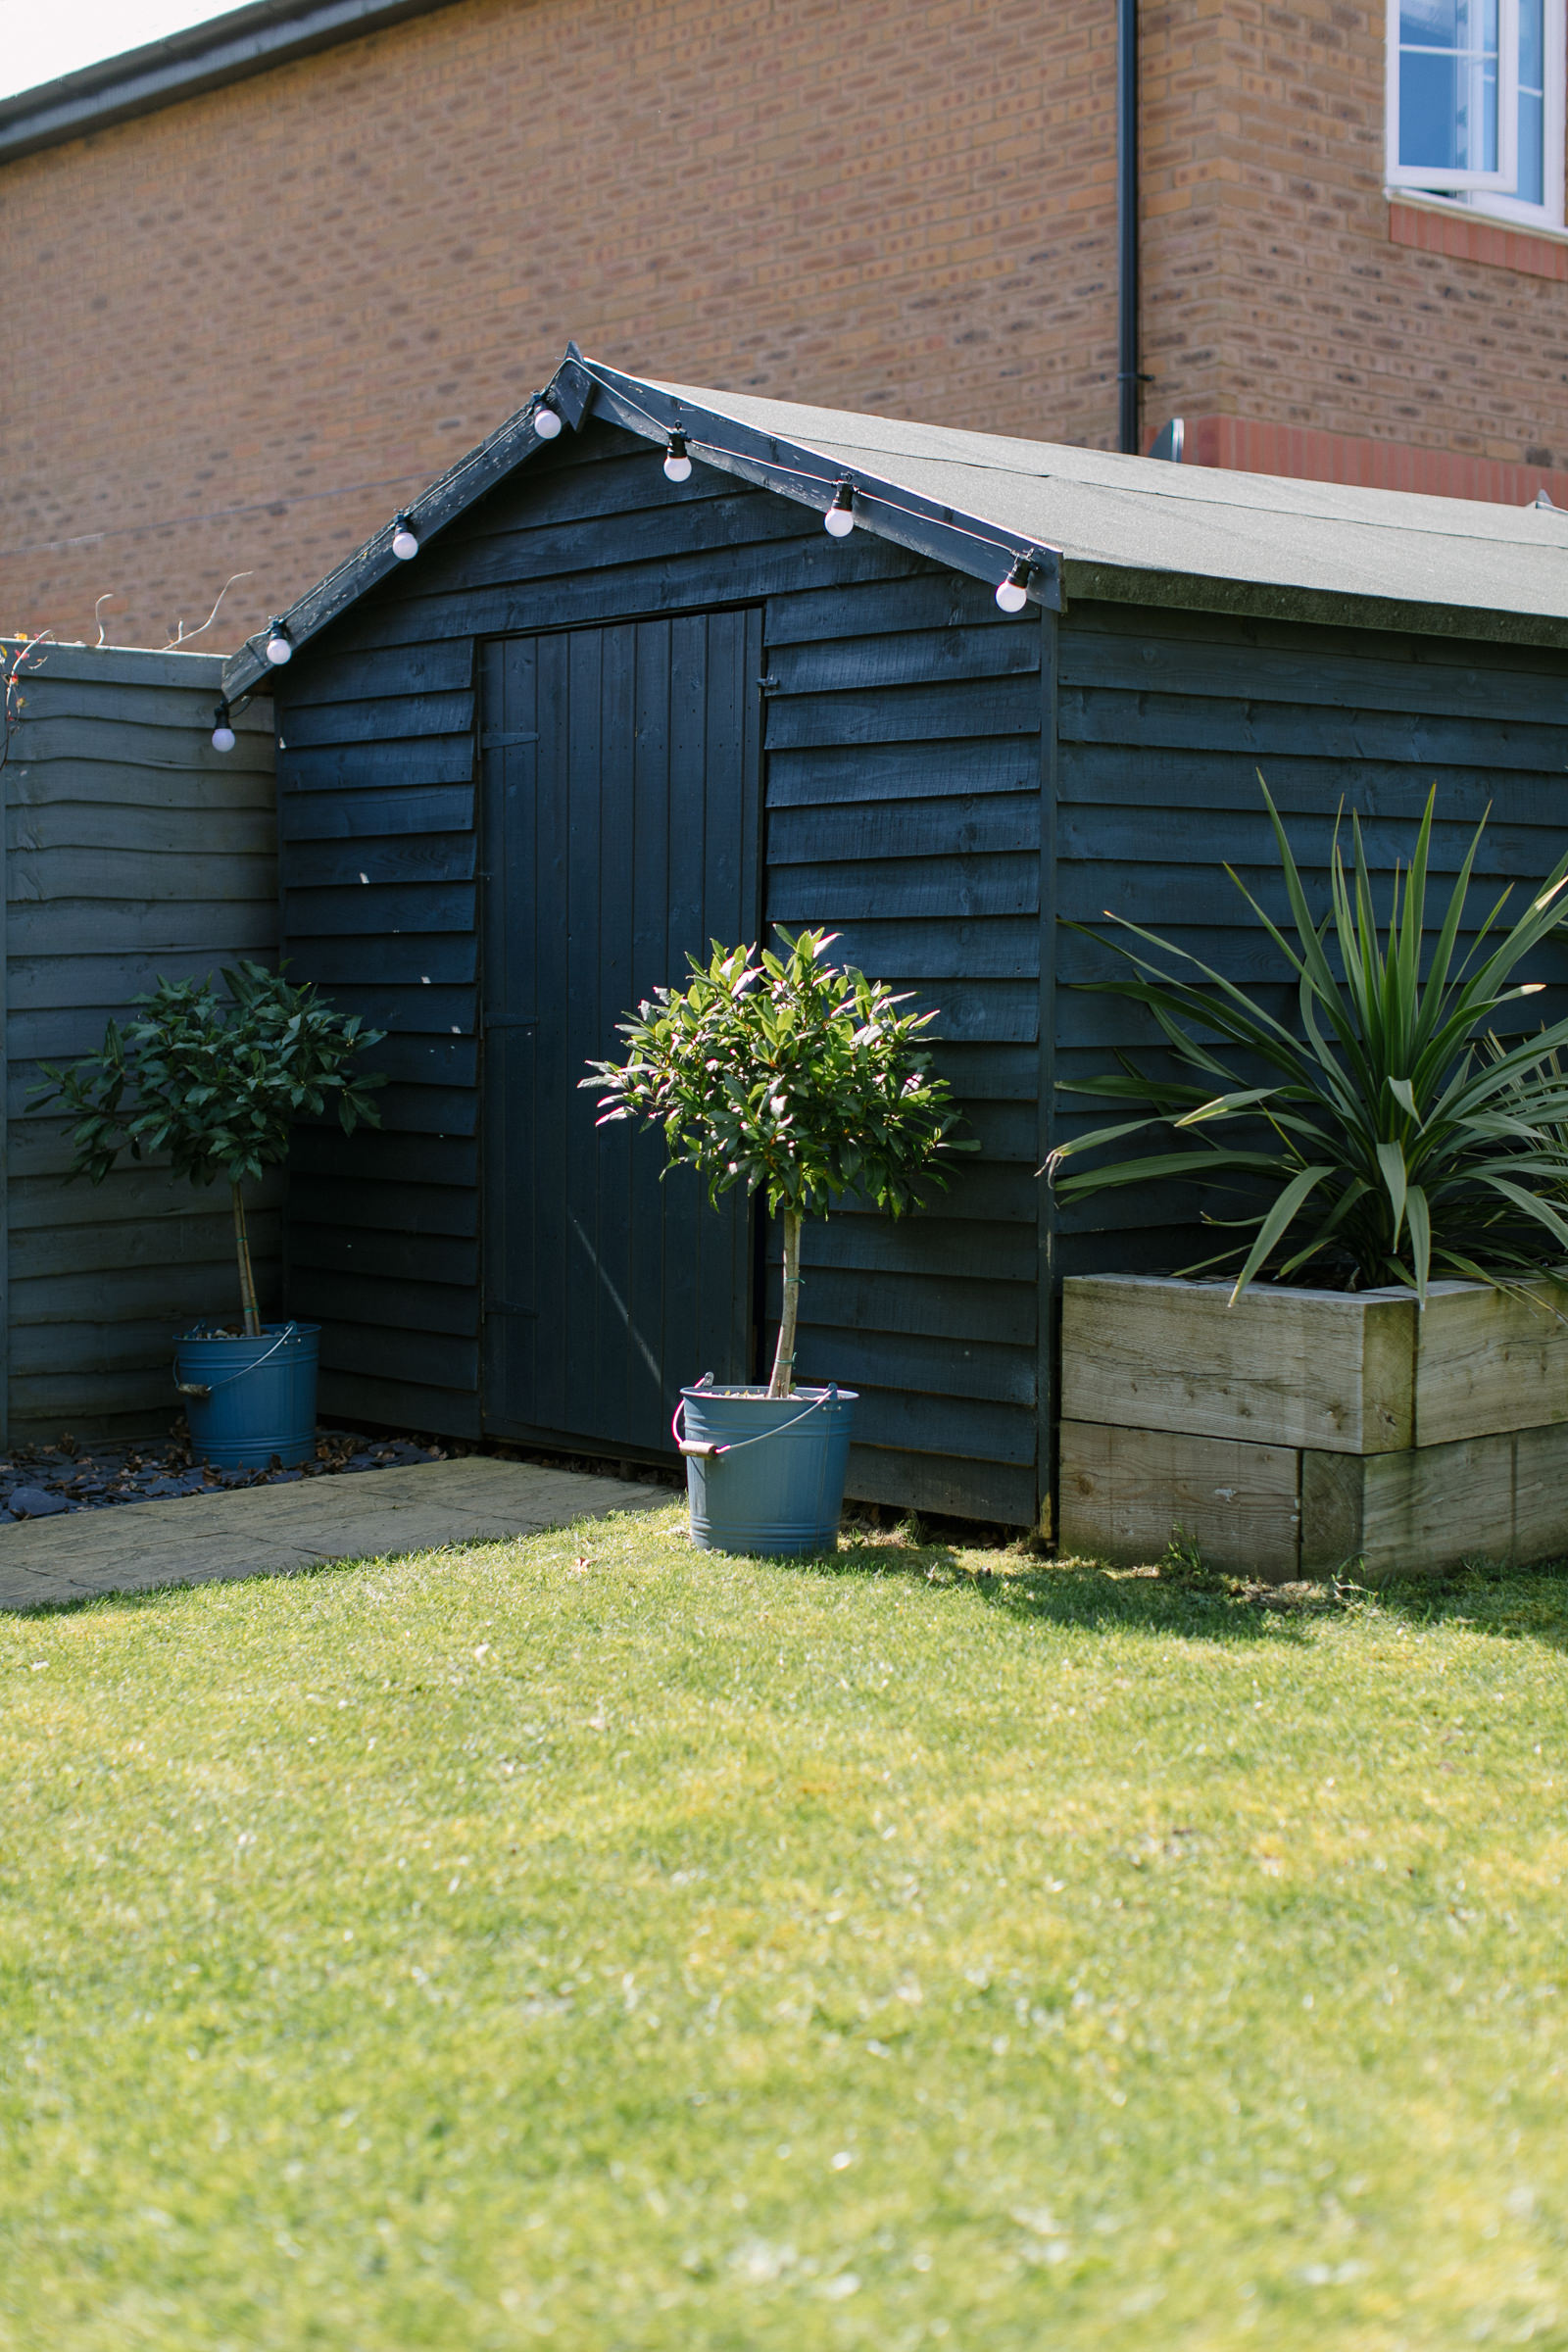 Garden shed in a new build garden painted dark grey and decorated with monochrome festoon lights